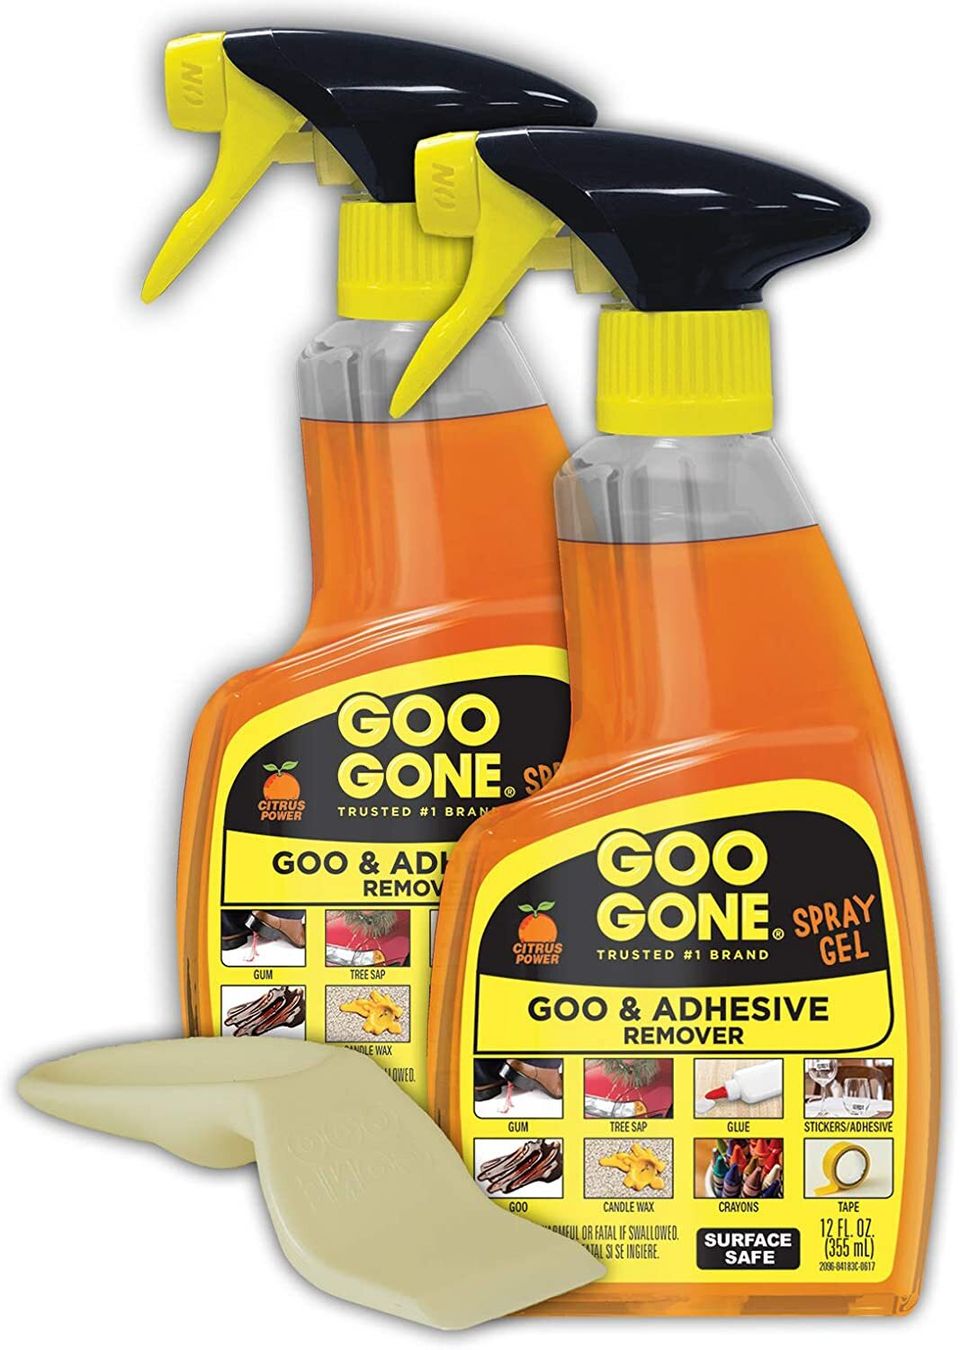 Goo Gone 14 Oz. Grout Clean & Restore Multi Surface Safe - Power